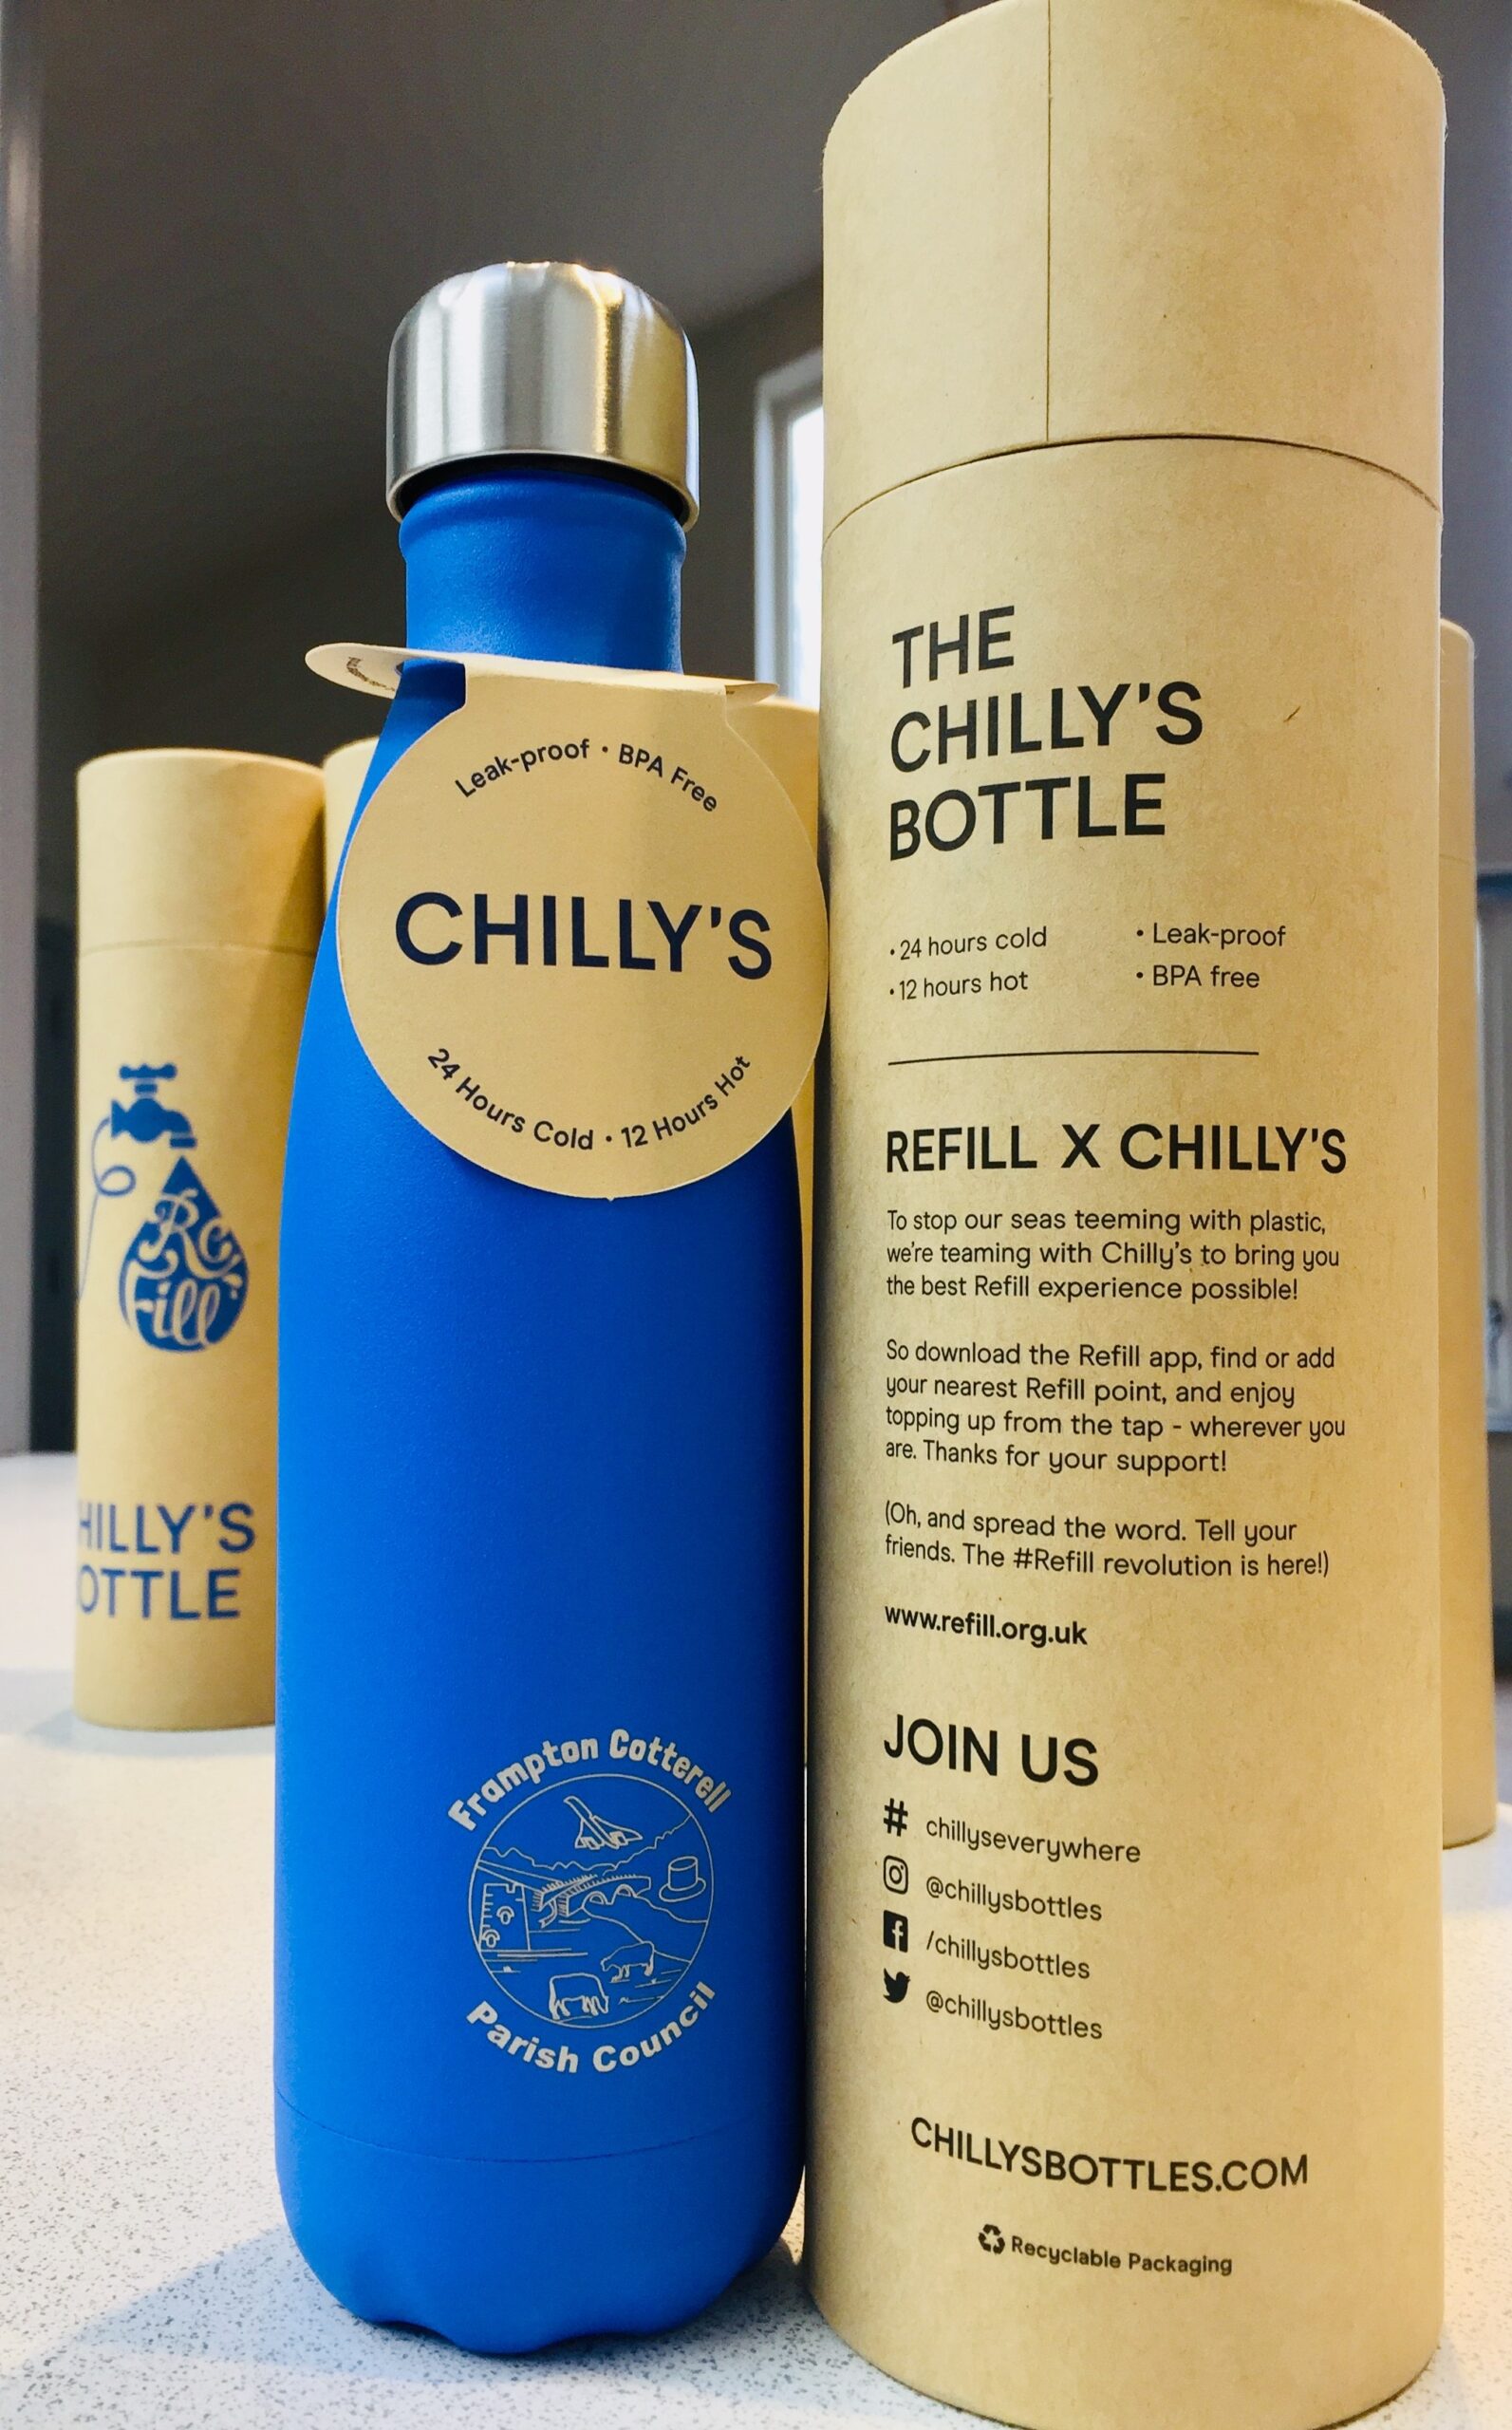 A photograph of a blue reusable water bottle, branded with "Frampton Cotterell Parish Council. It stands beside a "Chilly's" branded cardboard tube. On the tube. the following text is printed: The Chilly's Bottle. 24 hours cold. 12 hours hot. Leak Proof. BPA Free. Refill X Chillys. To stop our seas teeming with plastic, we're teaming with Chilly's to bring you the best Refill experience possible! So download the Refill app, find or add your nearest Refill point, and enjoy topping up from the tap - wherever you are. Thanks for your support! (Oh, and spread the word. Tell your friends. The #Refill Revolution is here!!) www.refill.org.uk JOIN US #ChillysEverywhere [Instagram logo] @chillysbottles [facebook logo] /chillysbottles [twitter logo] @chillysbottles chillysbottles.com